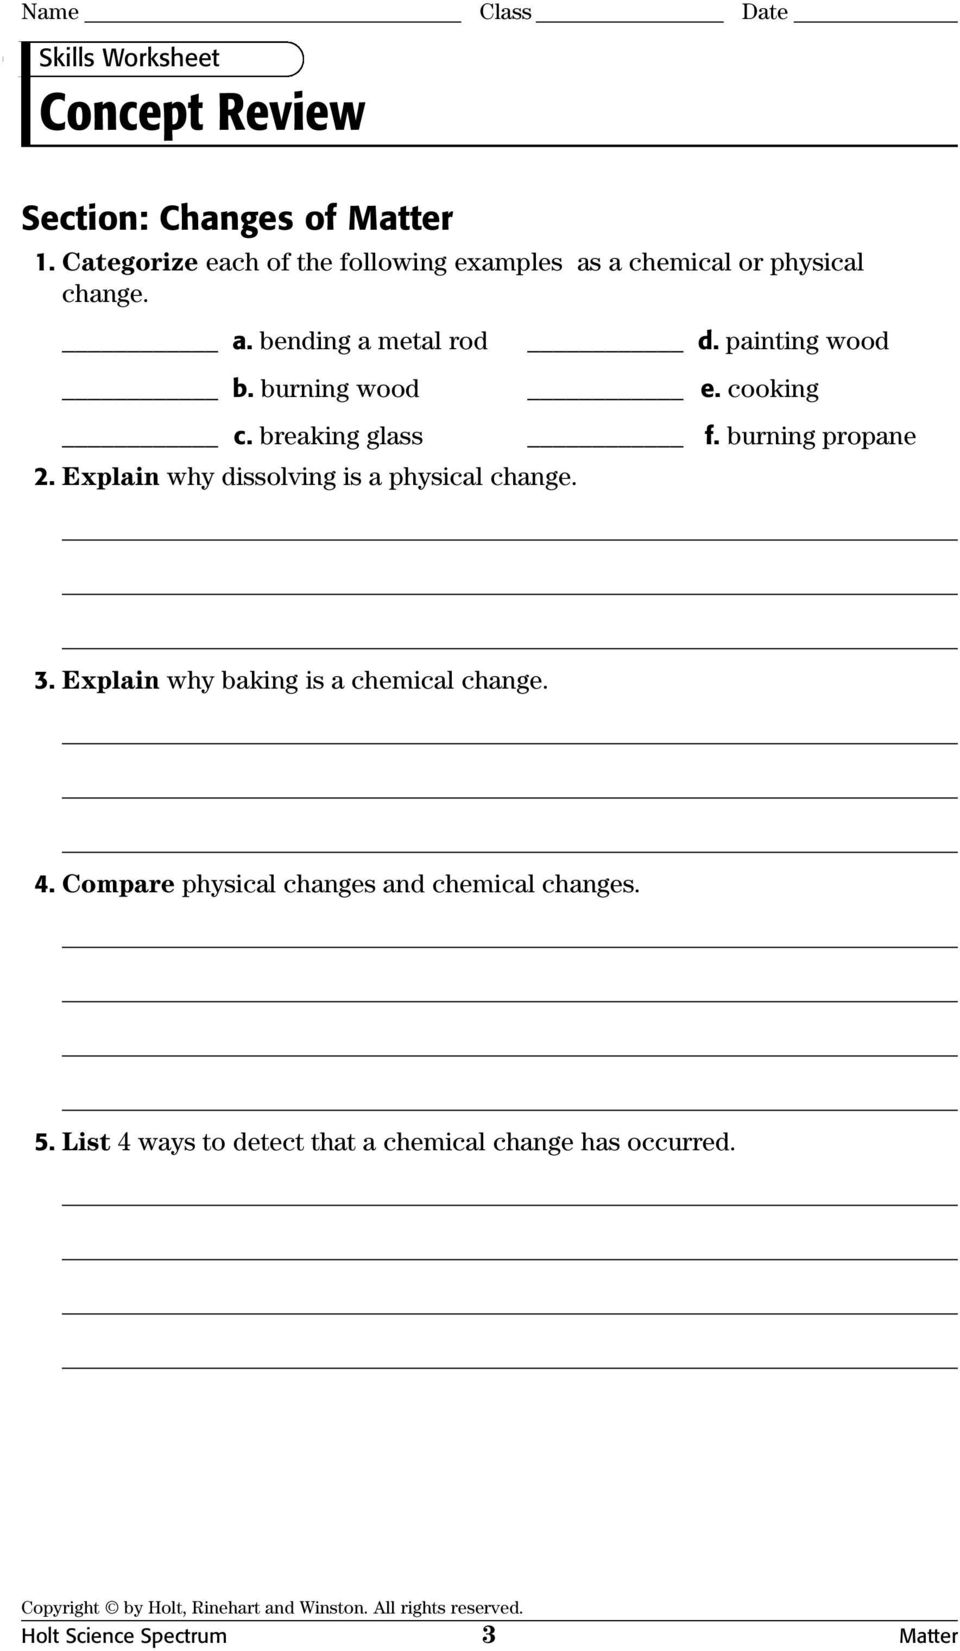 States Of Matter Worksheets For Middle School Composition Of